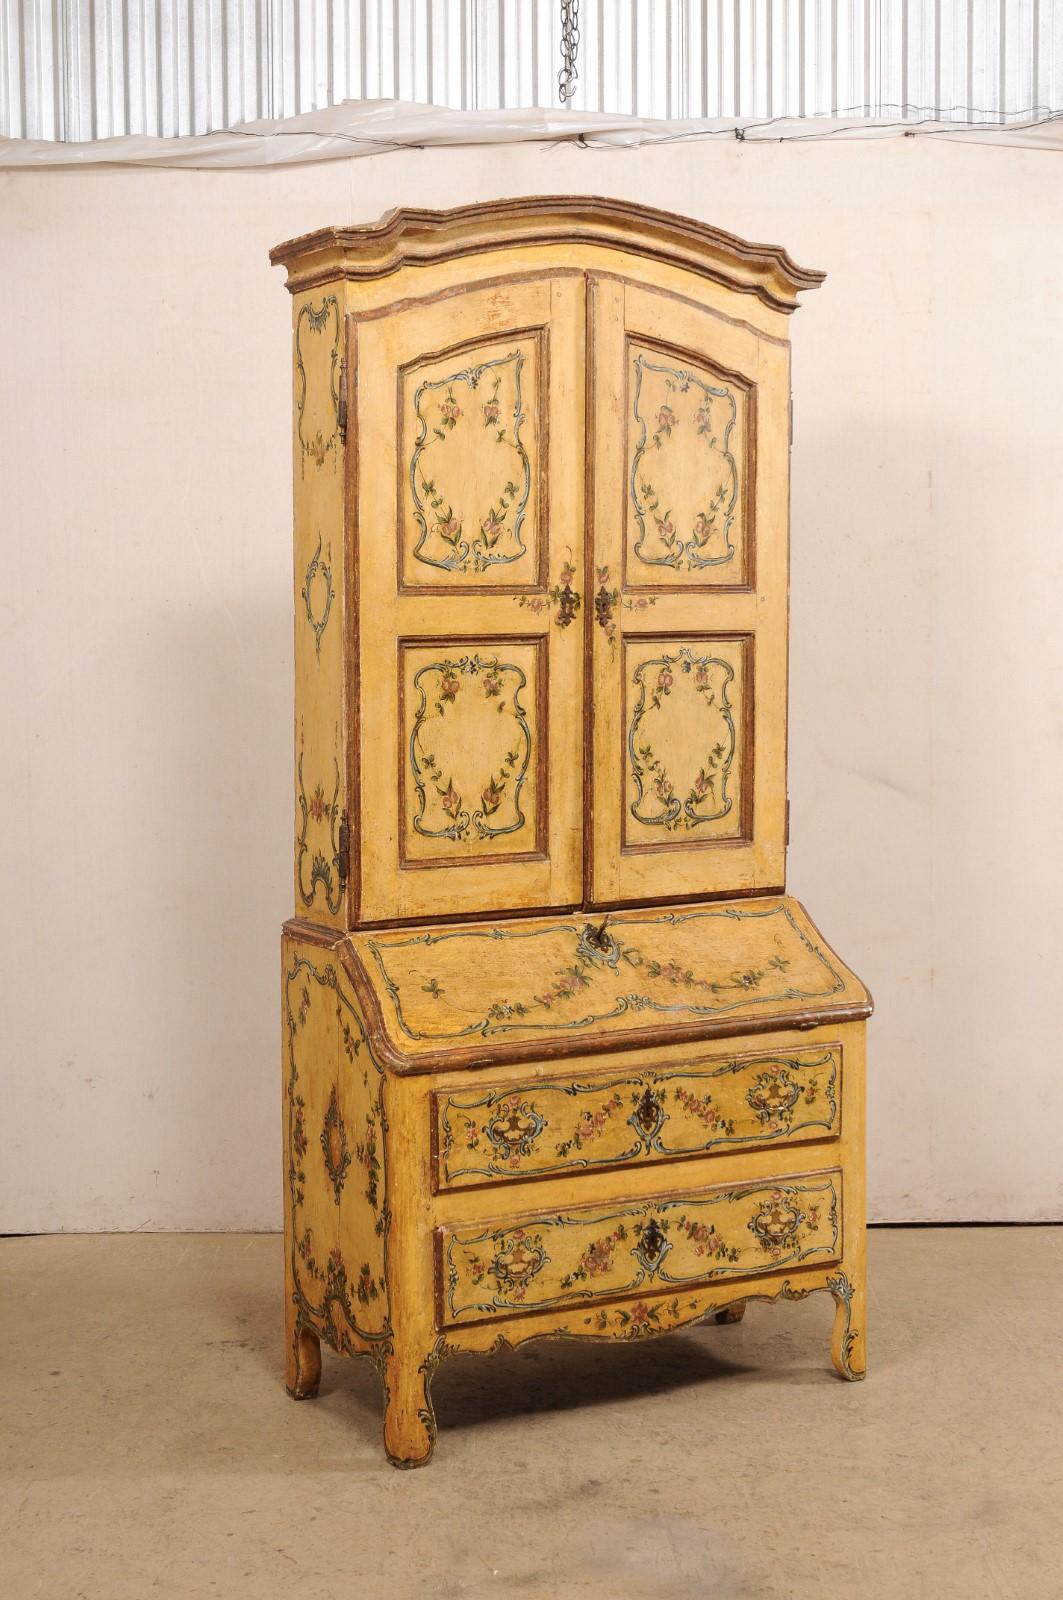 An Italian Venetian tall secretary cabinet from the 18th century. This antique 7.75 feet tall (approximate) cabinet from Venice, Italy boasts a beautifully hand-painted and embellished exterior in a floral, leaf, and scrolling cartouche motif. The